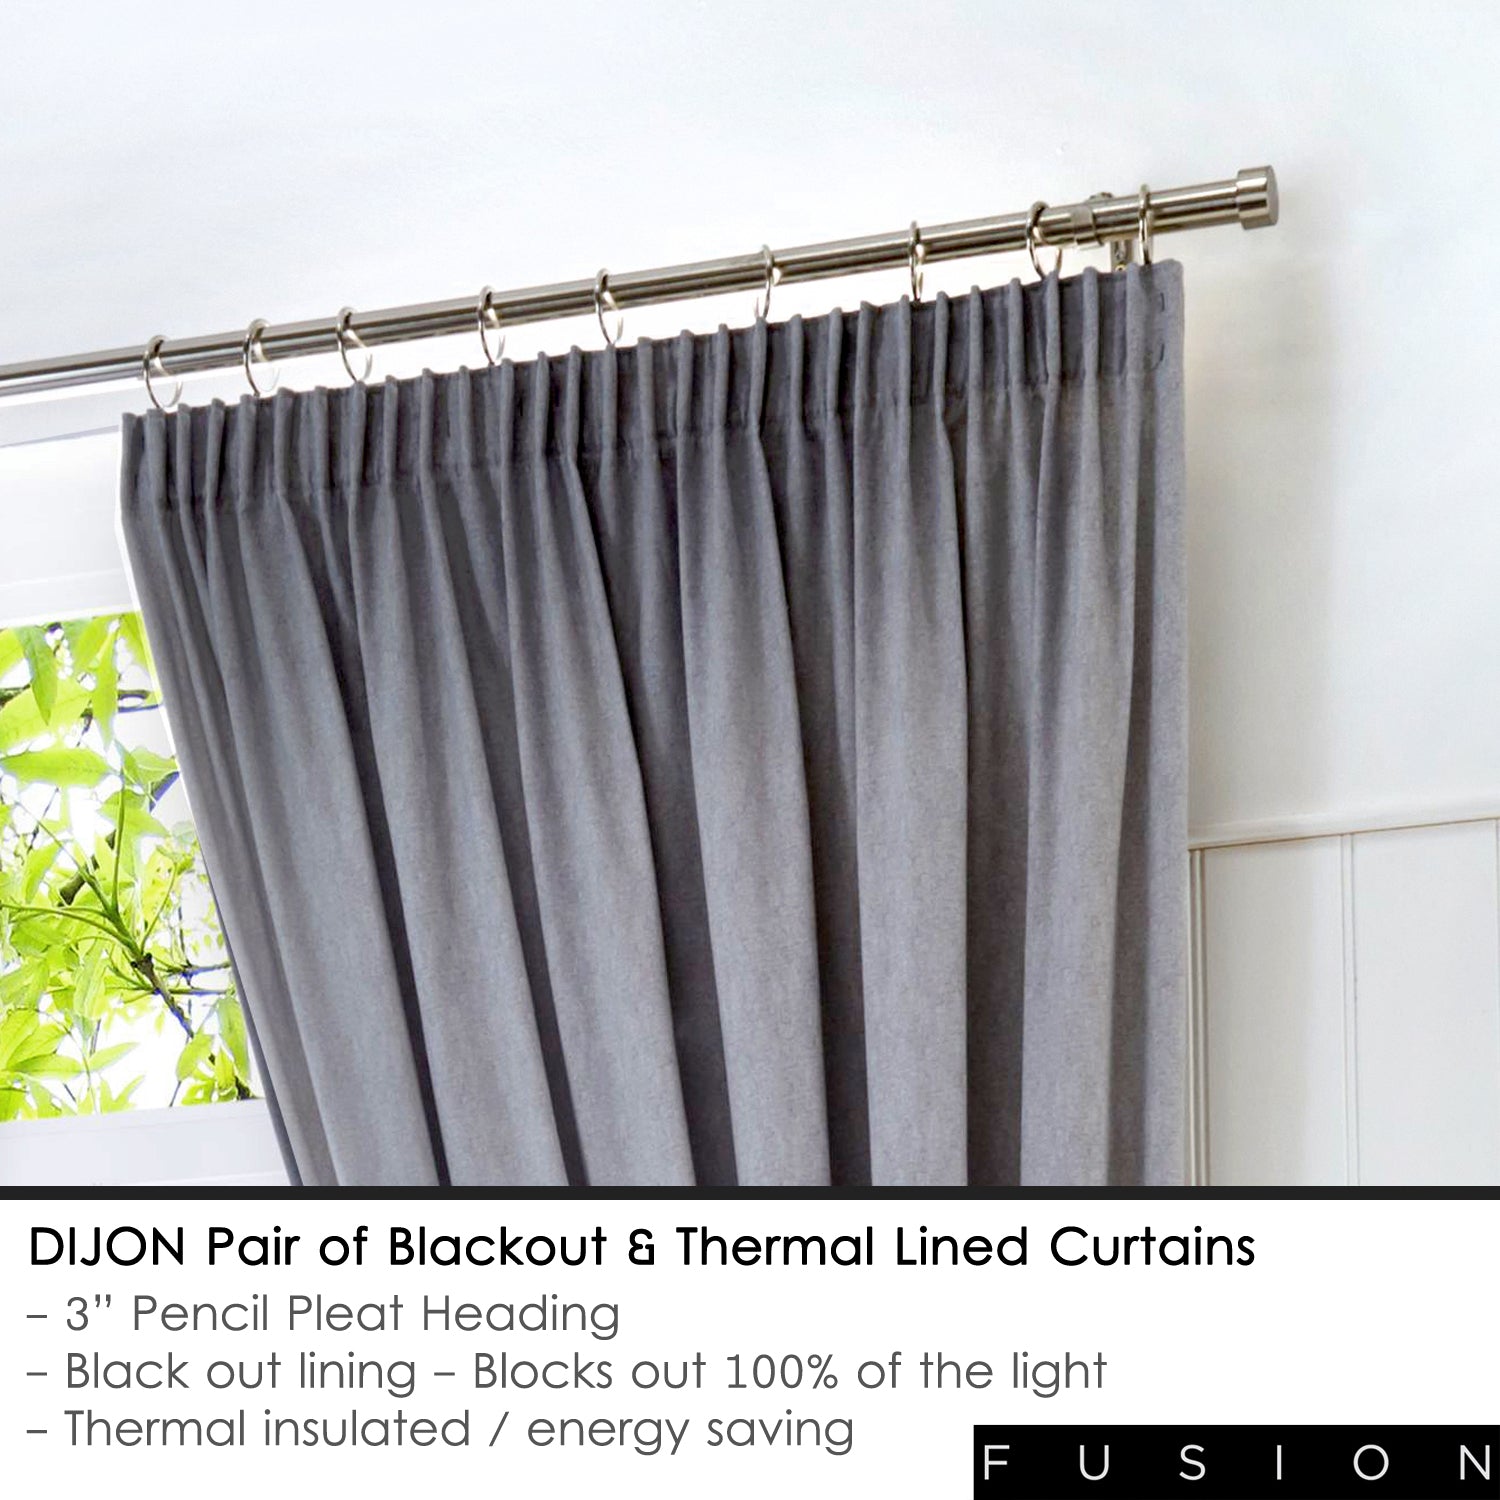 Dijon - Blackout Pair of Pencil Pleat Curtains in Silver - by Fusion